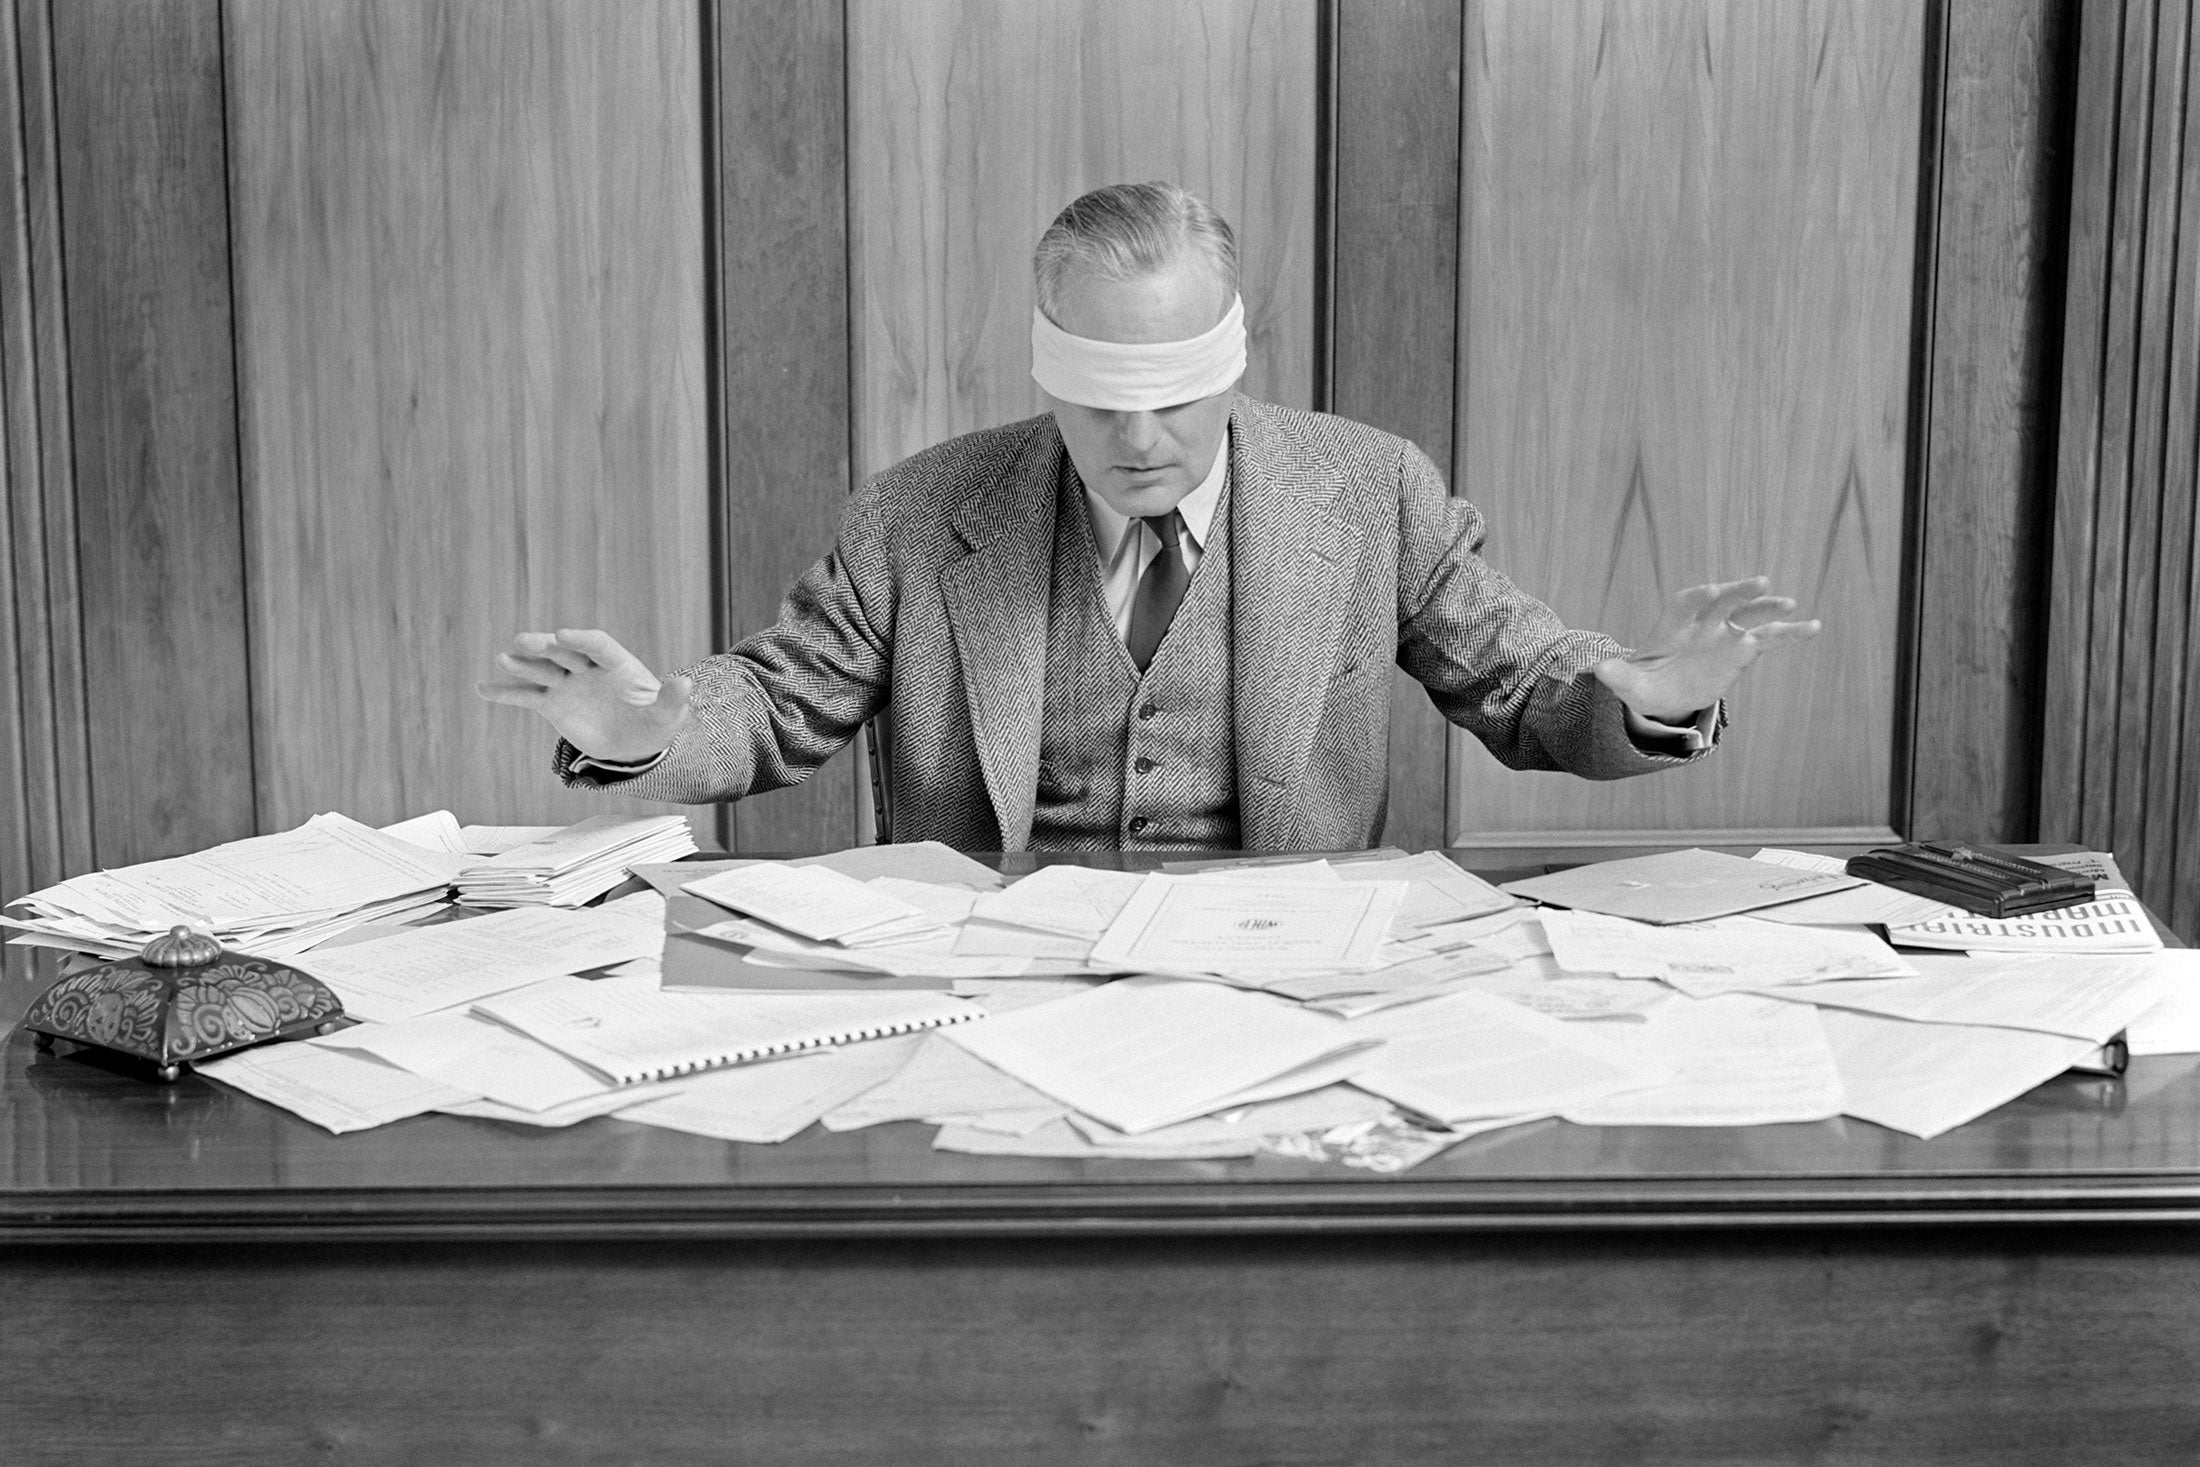 Blindfolded man sitting at a desk covered in papers.